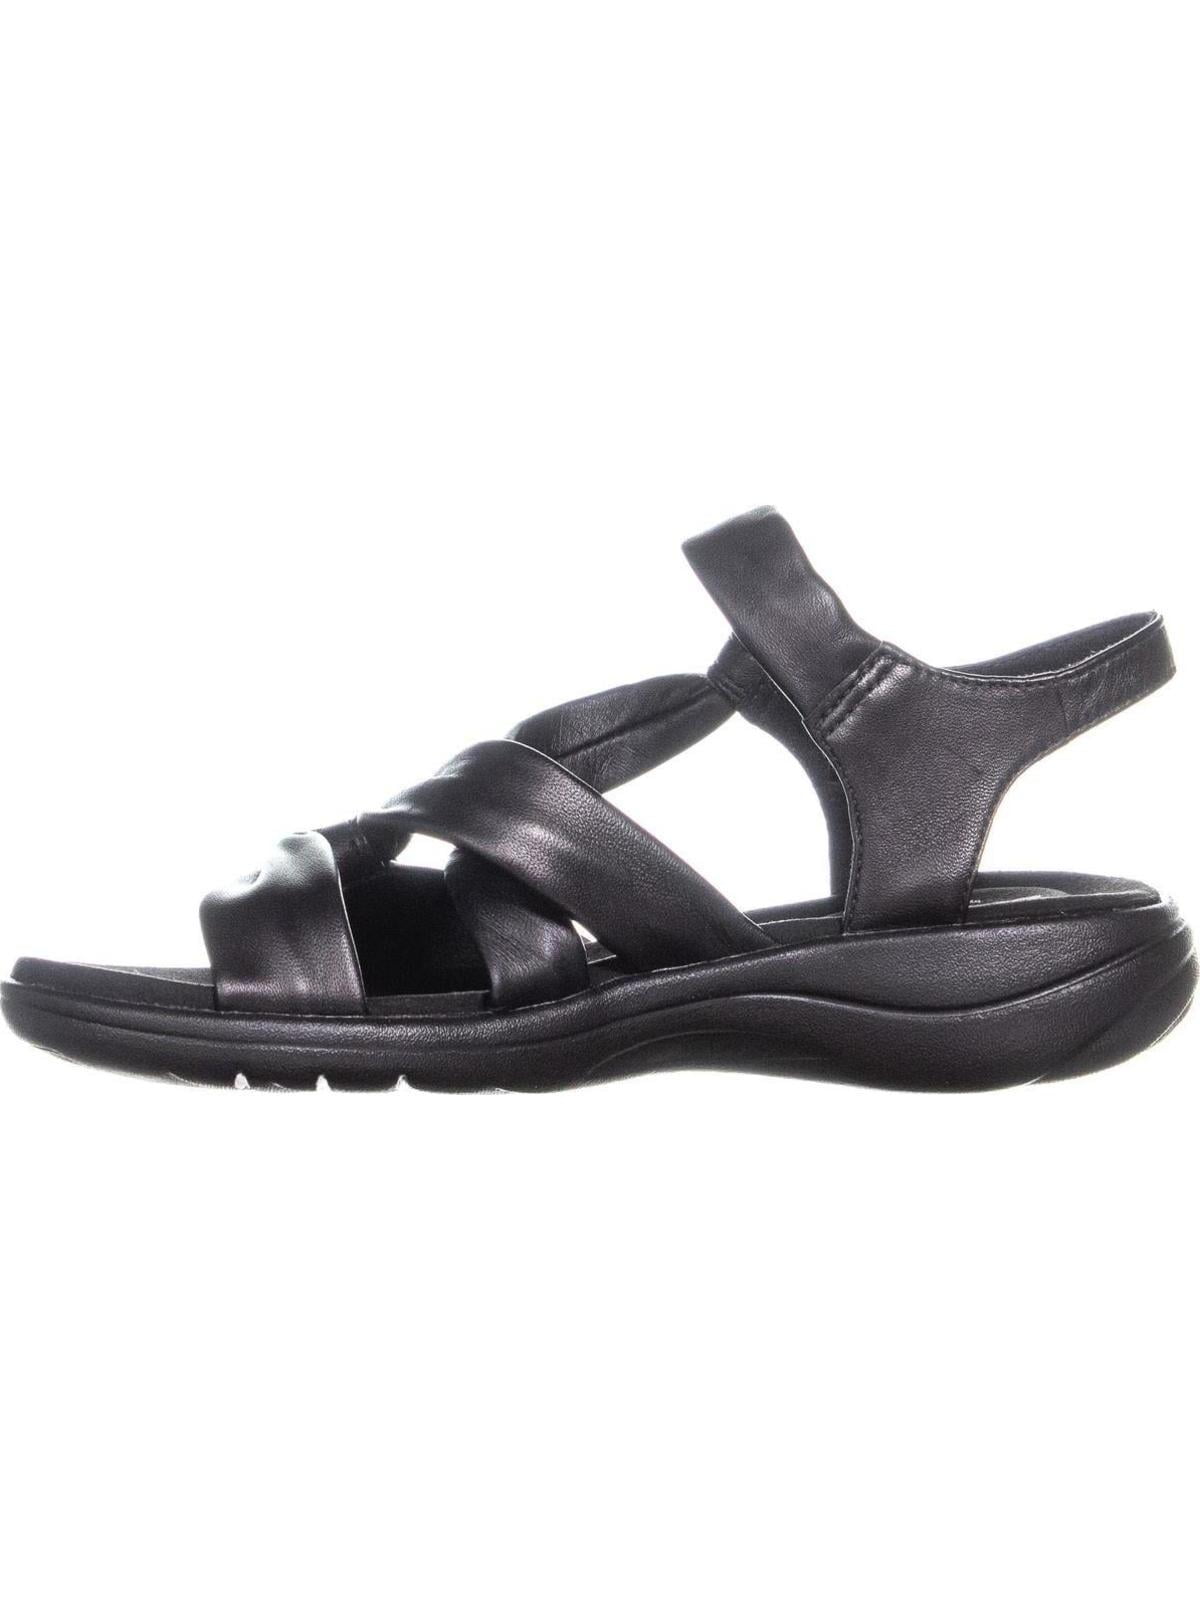 saylie moon sports leather sandals